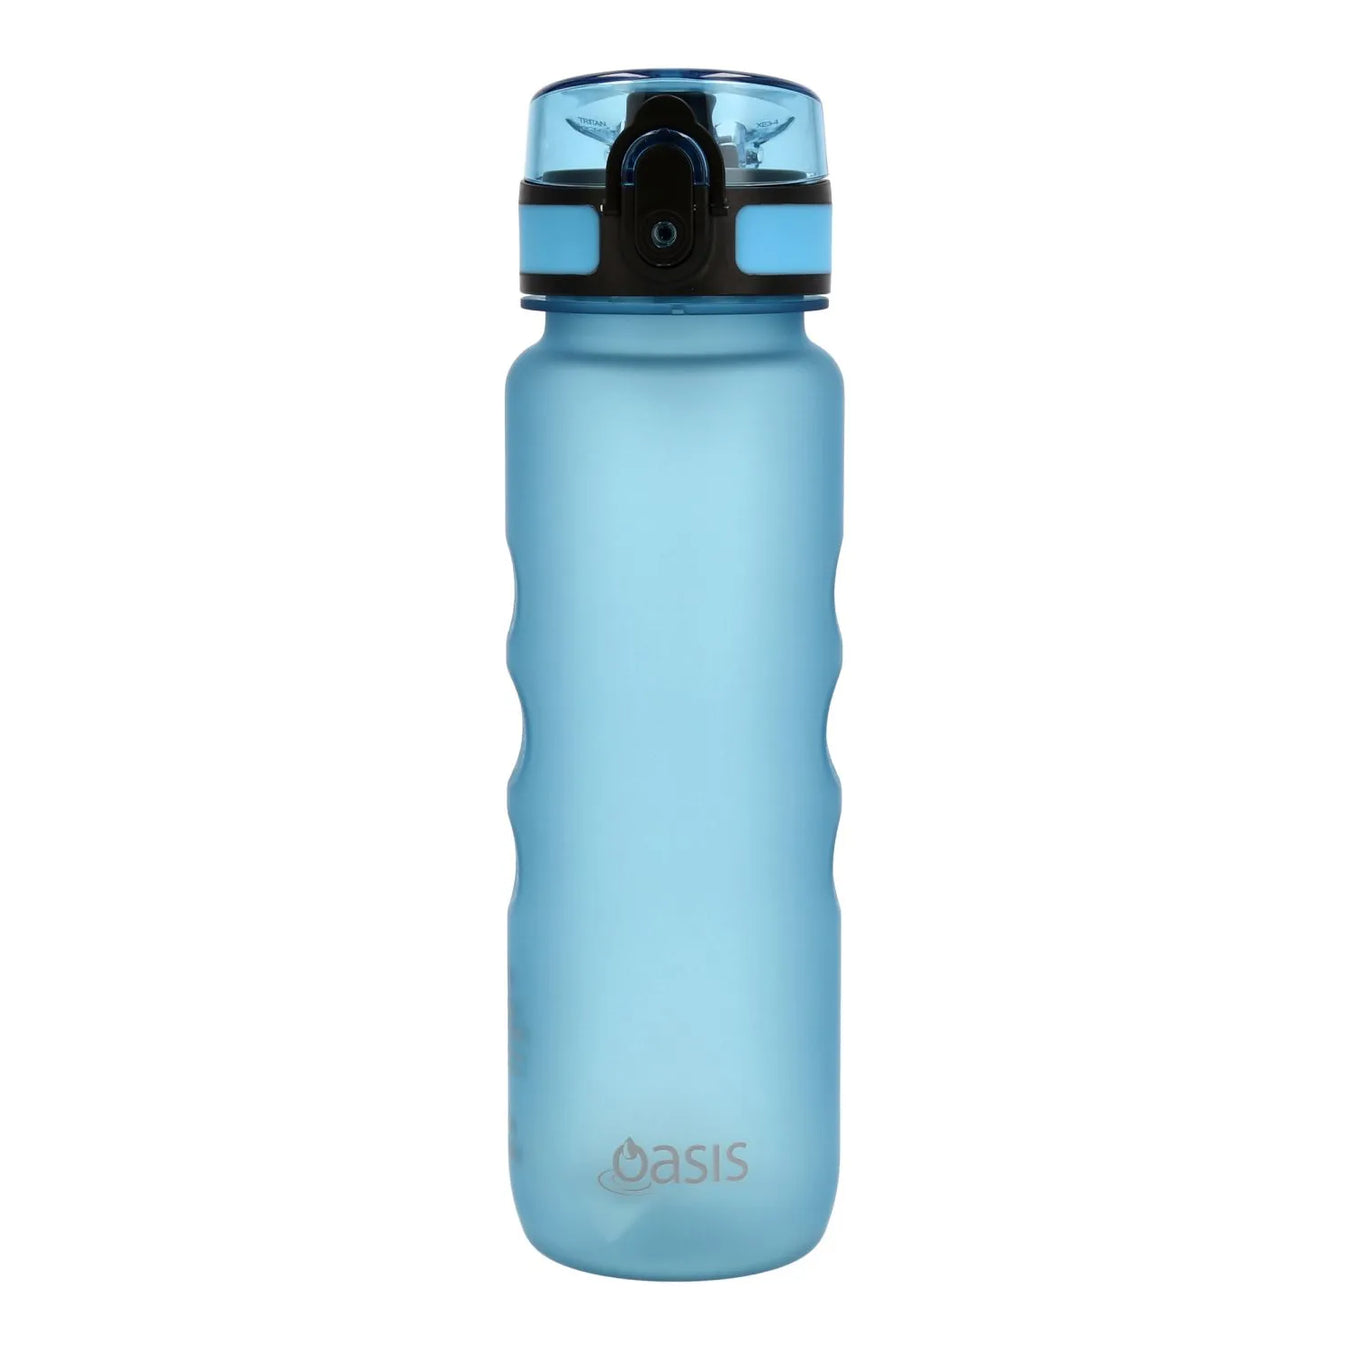 Oasis' Non-Insulated Bottles